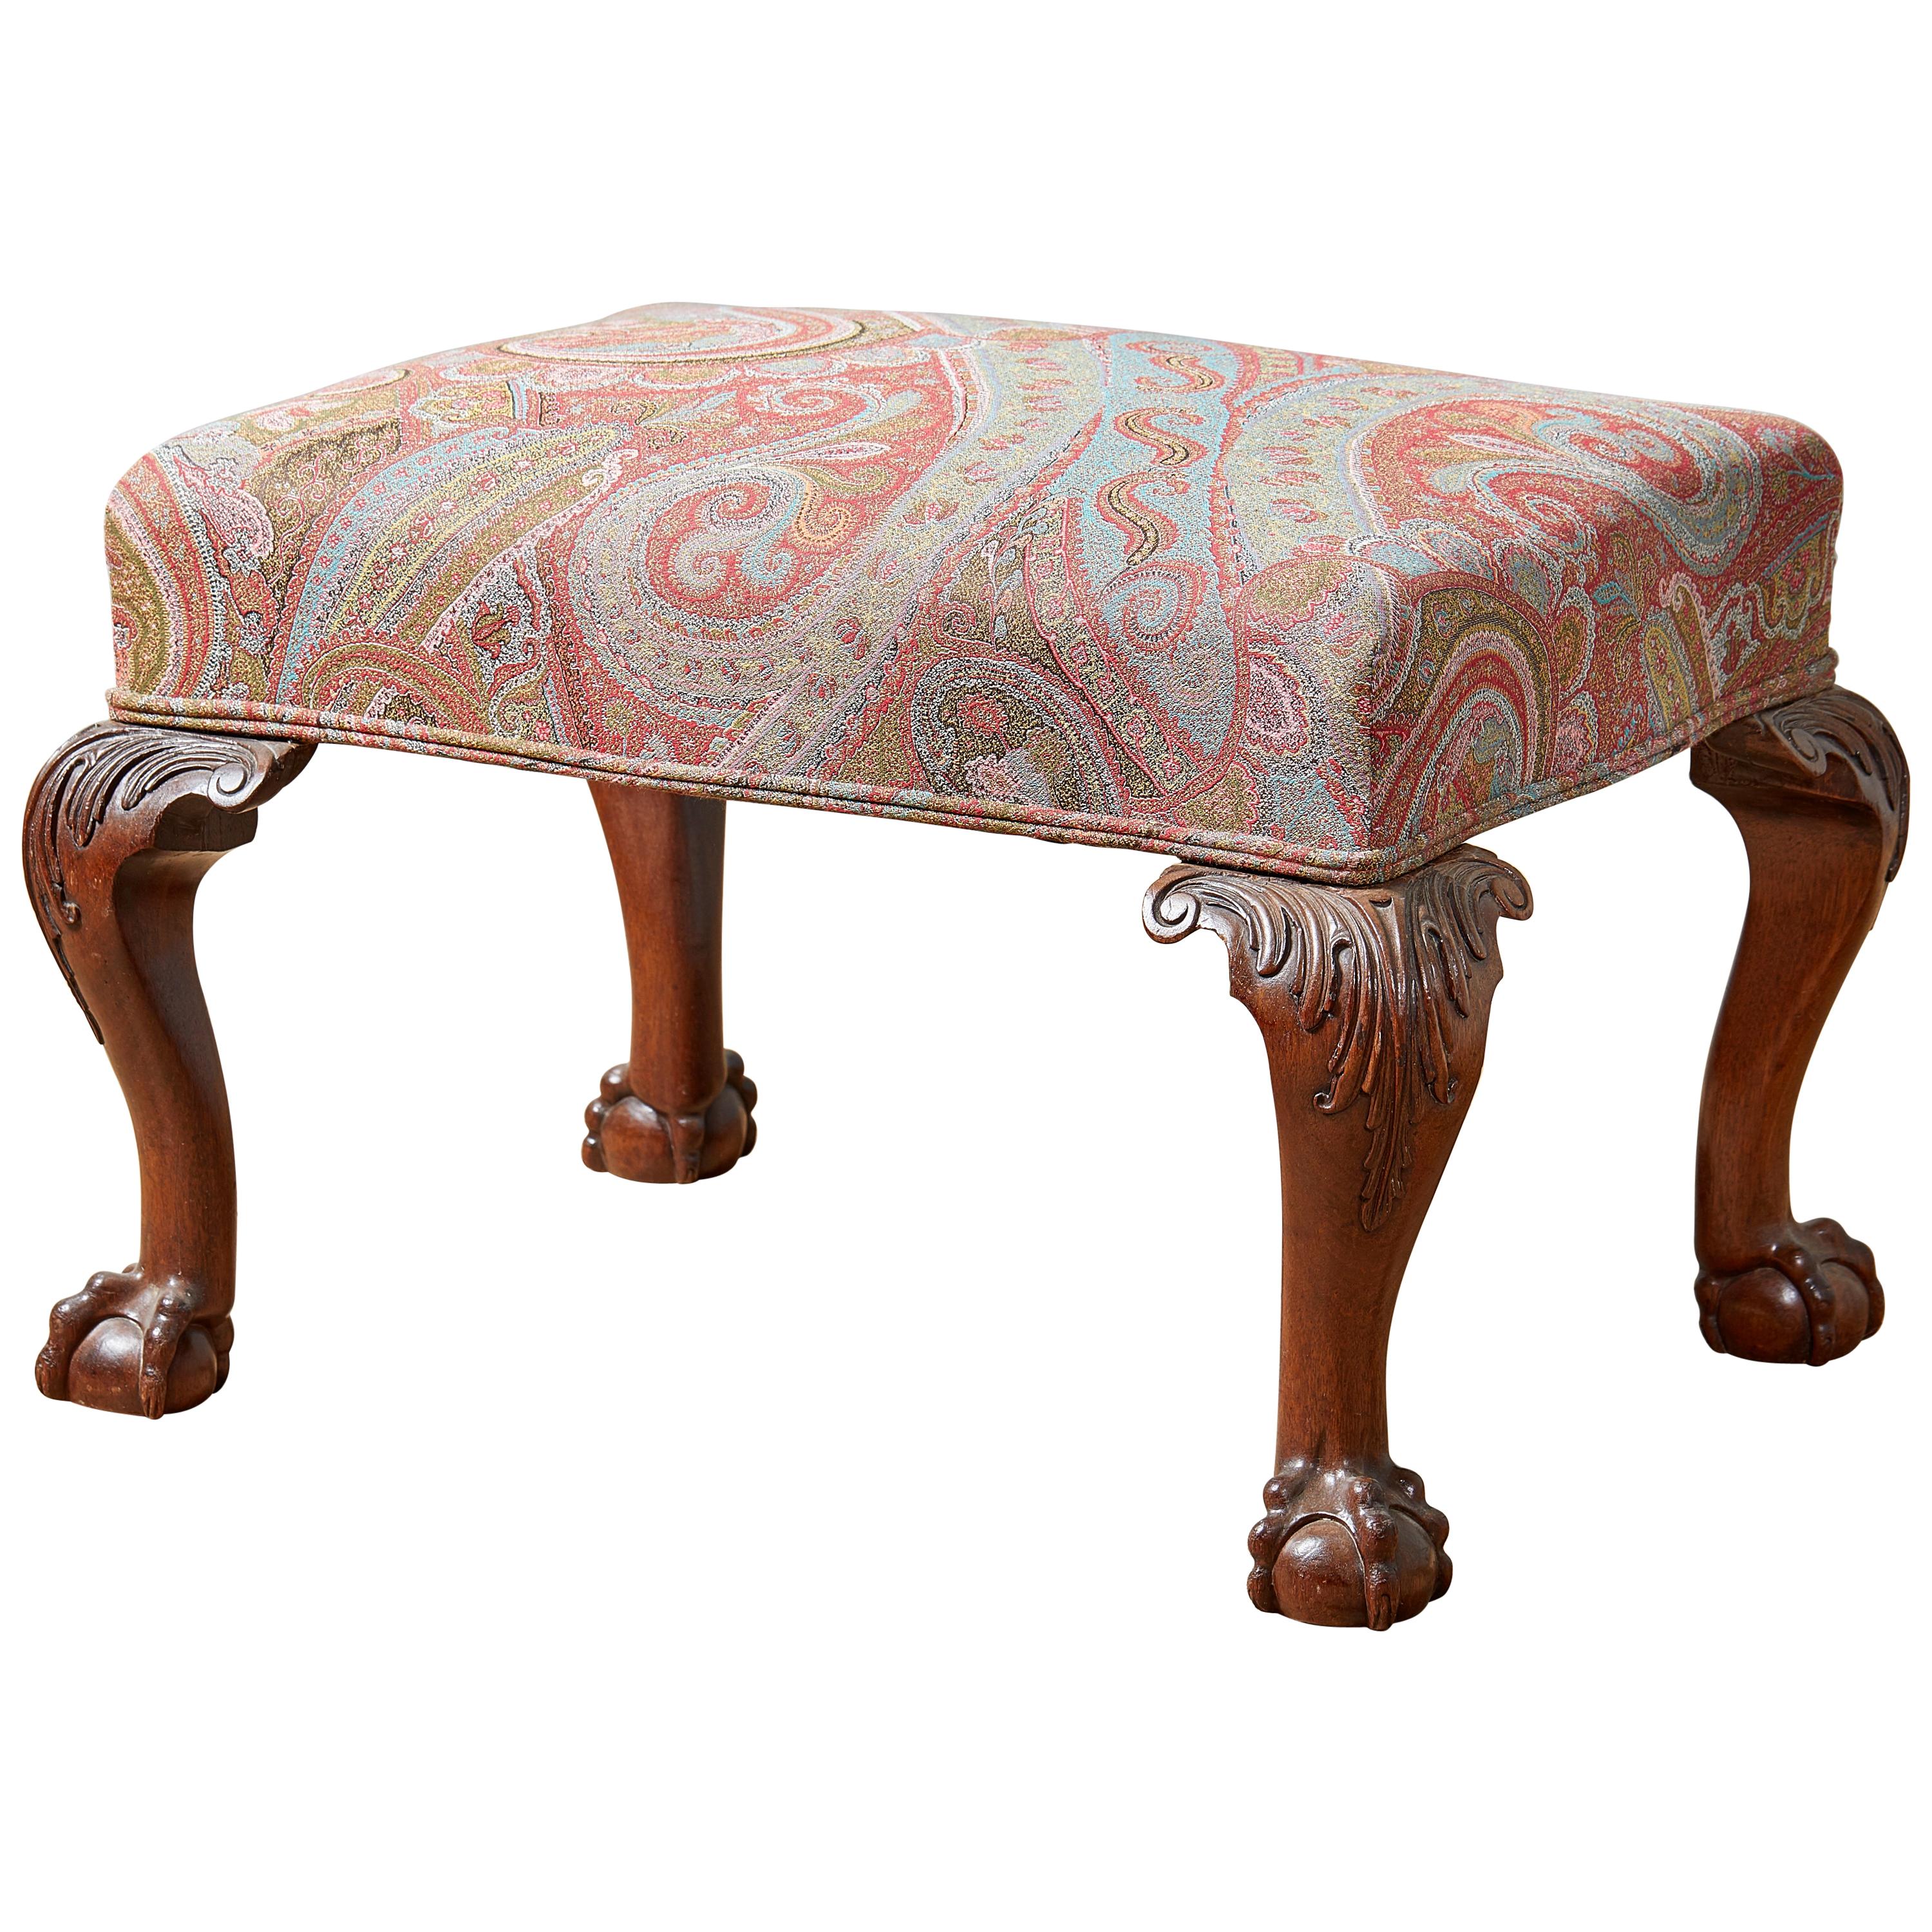 George II Style Mahogany Stool, Late 19th Century in Etro paisley fabric For Sale